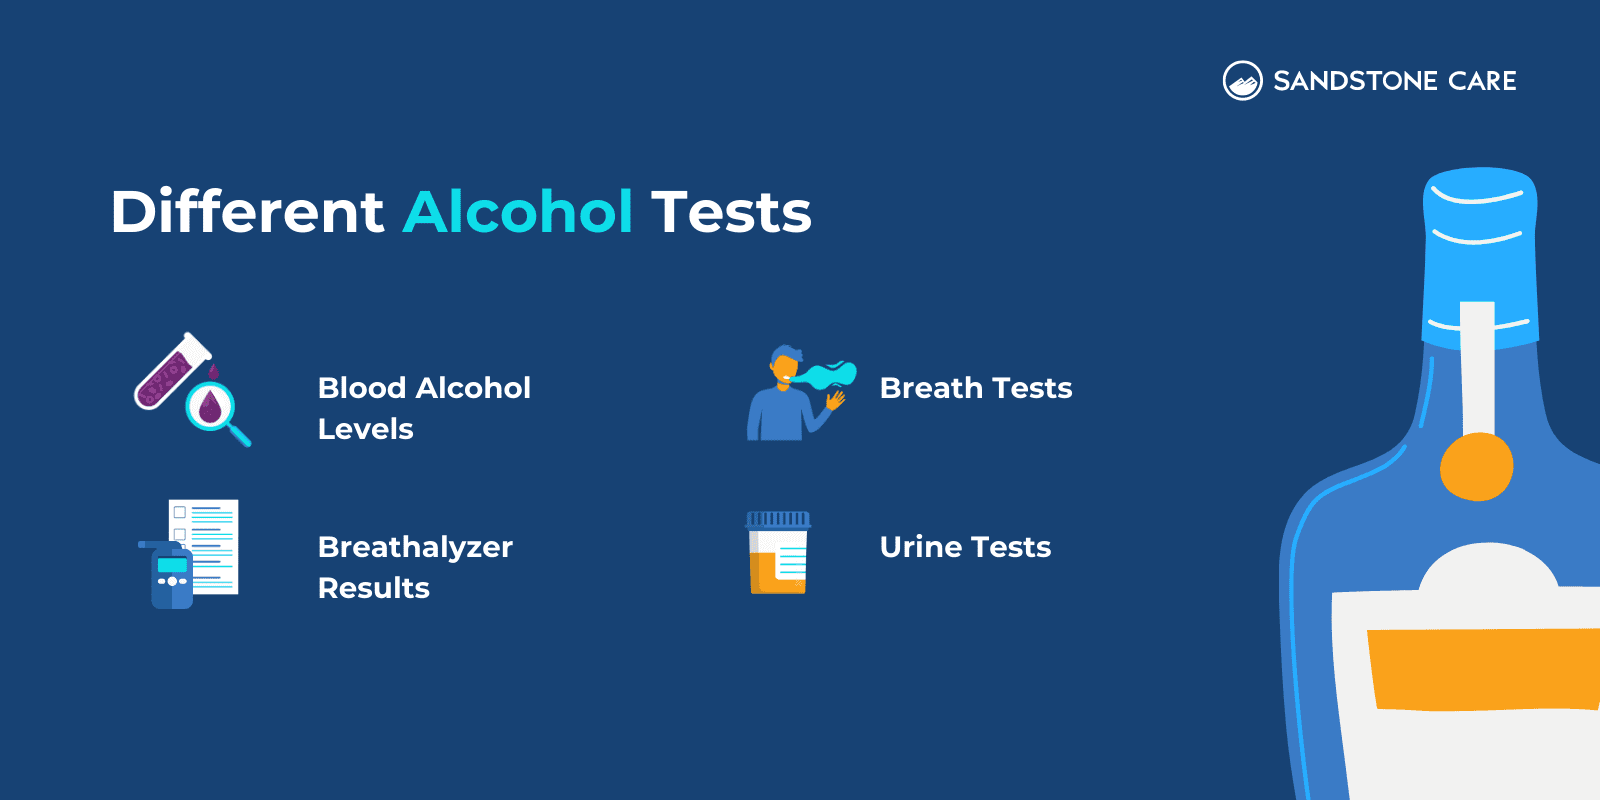 Different Alcohol Tests demonstrated with relevant graphics